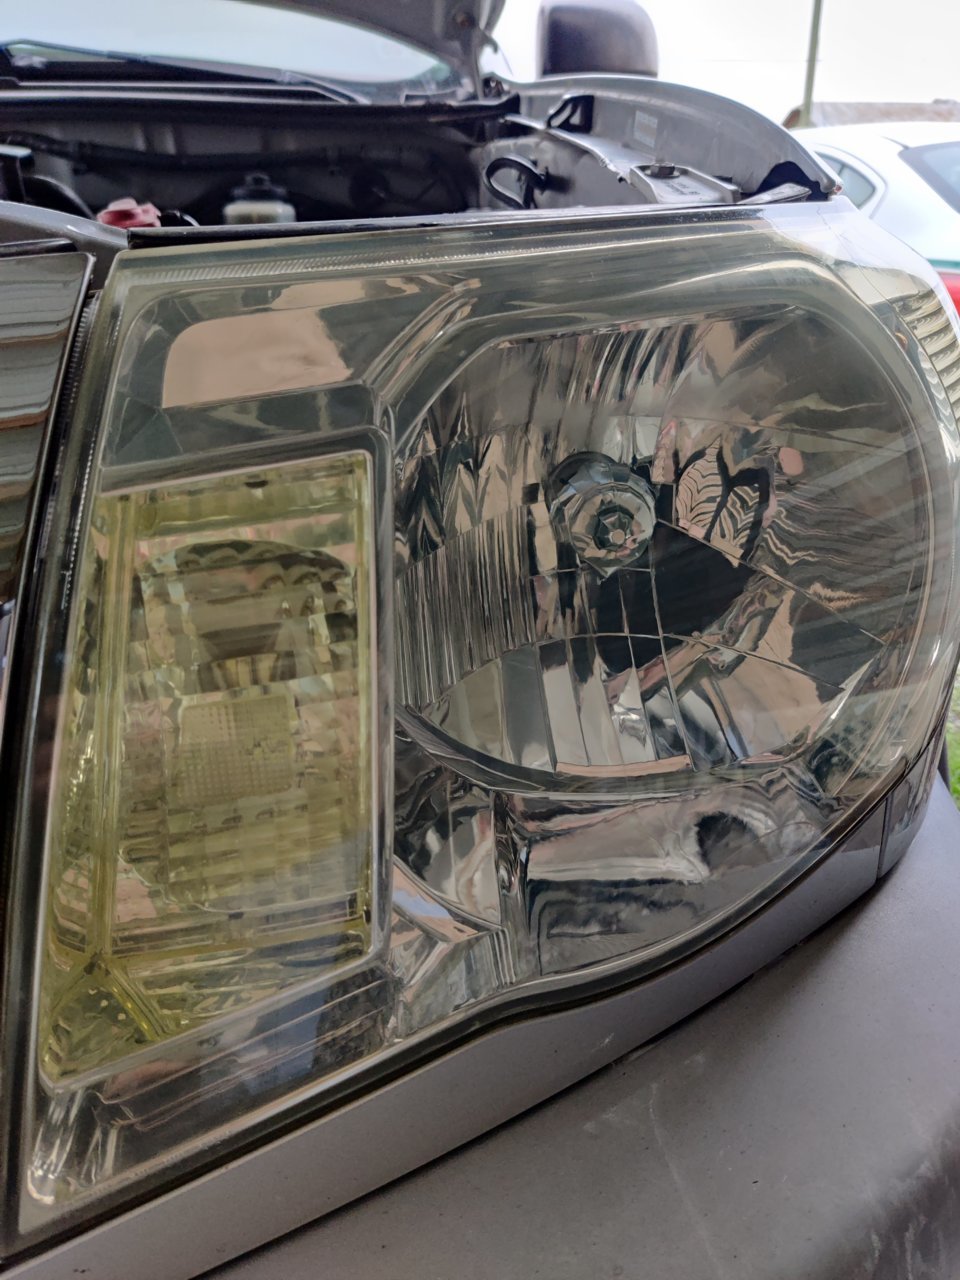 The ultimate headlight upgrade H4 (not LED or HID)